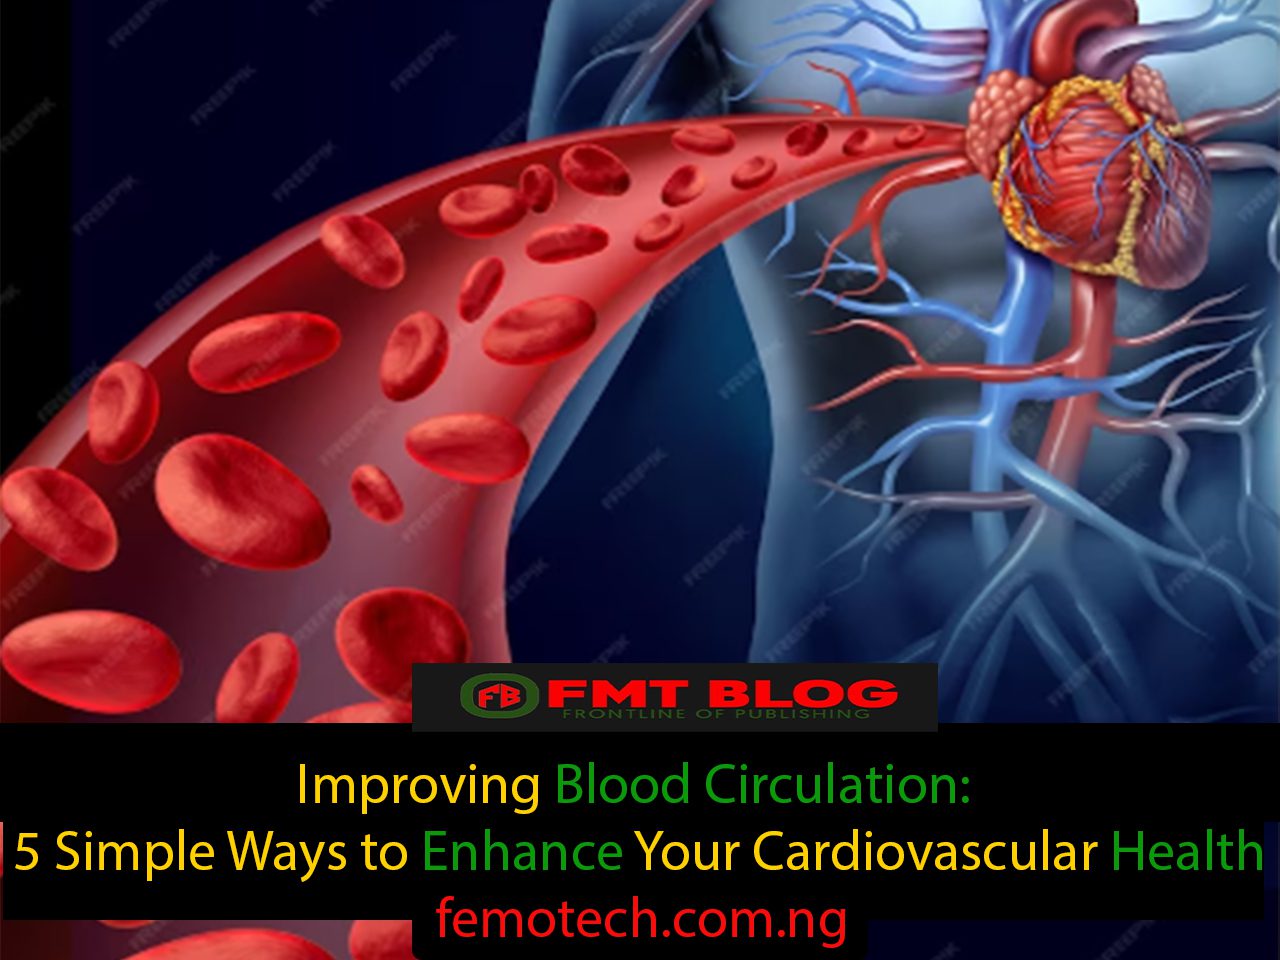 Improving Blood Circulation: 5 Simple Ways to Enhance Your Cardiovascular Health